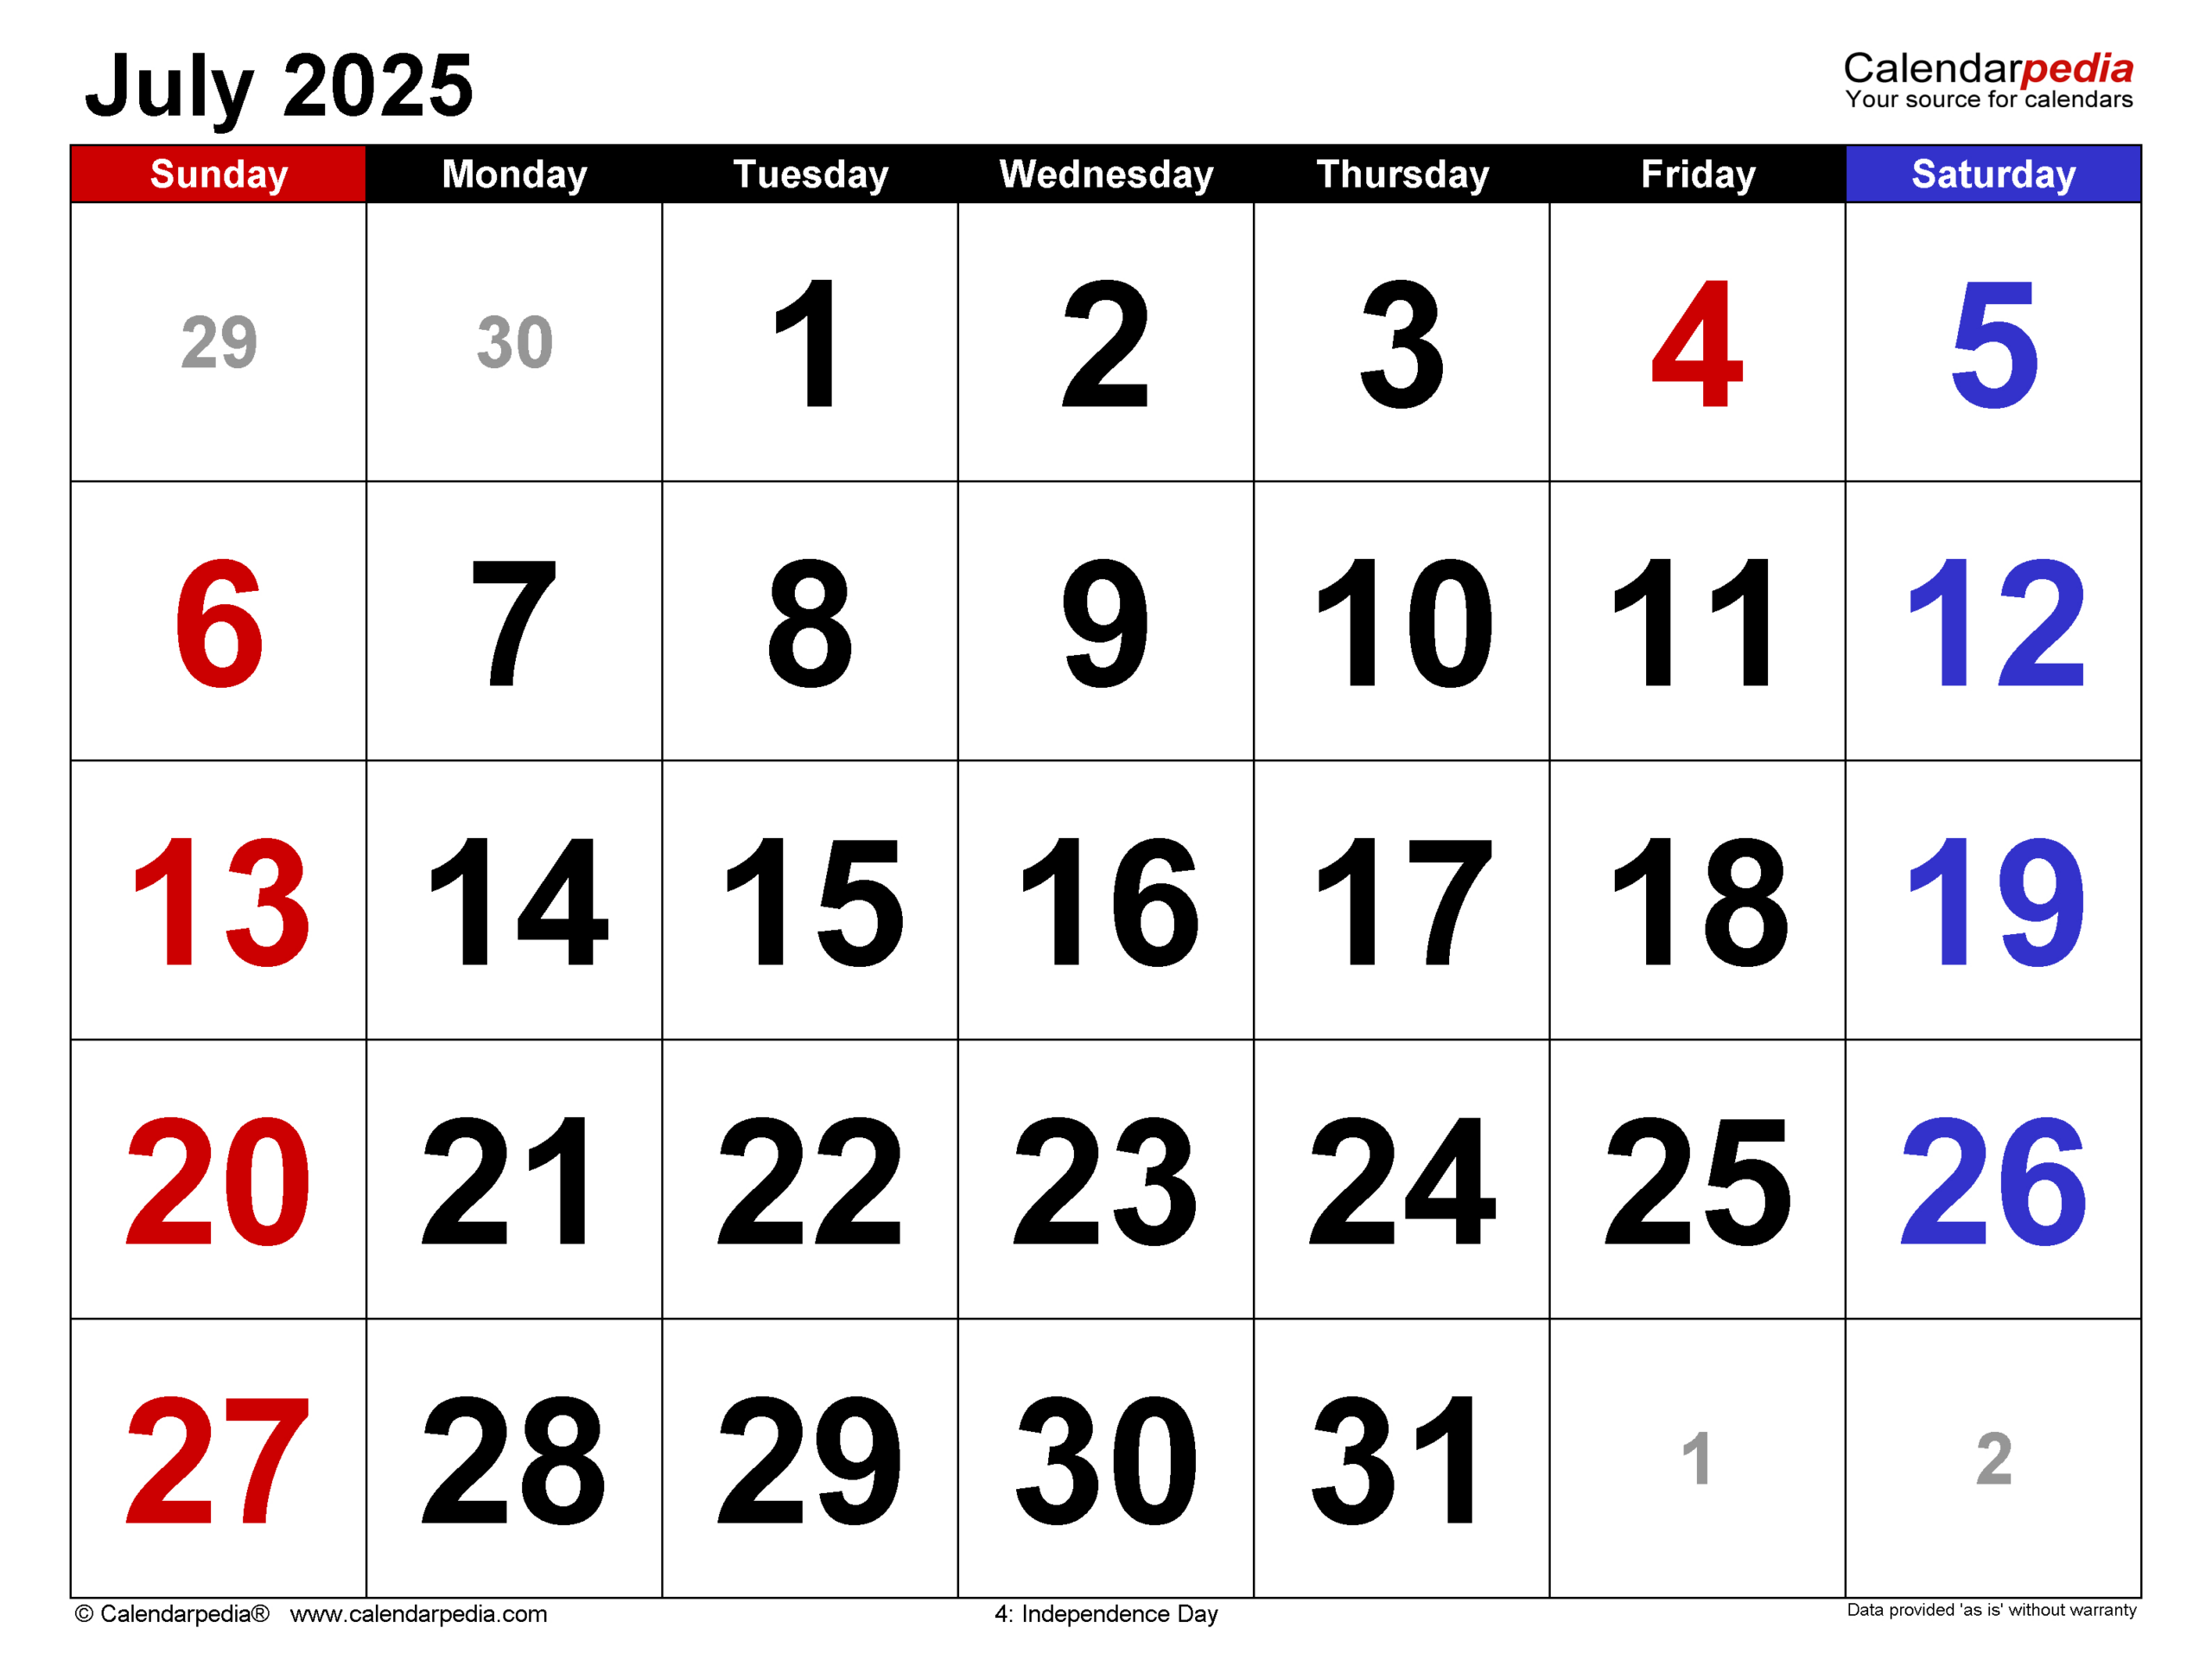 July 2025 Calendar | Templates For Word, Excel And Pdf regarding Calendar For July 2025